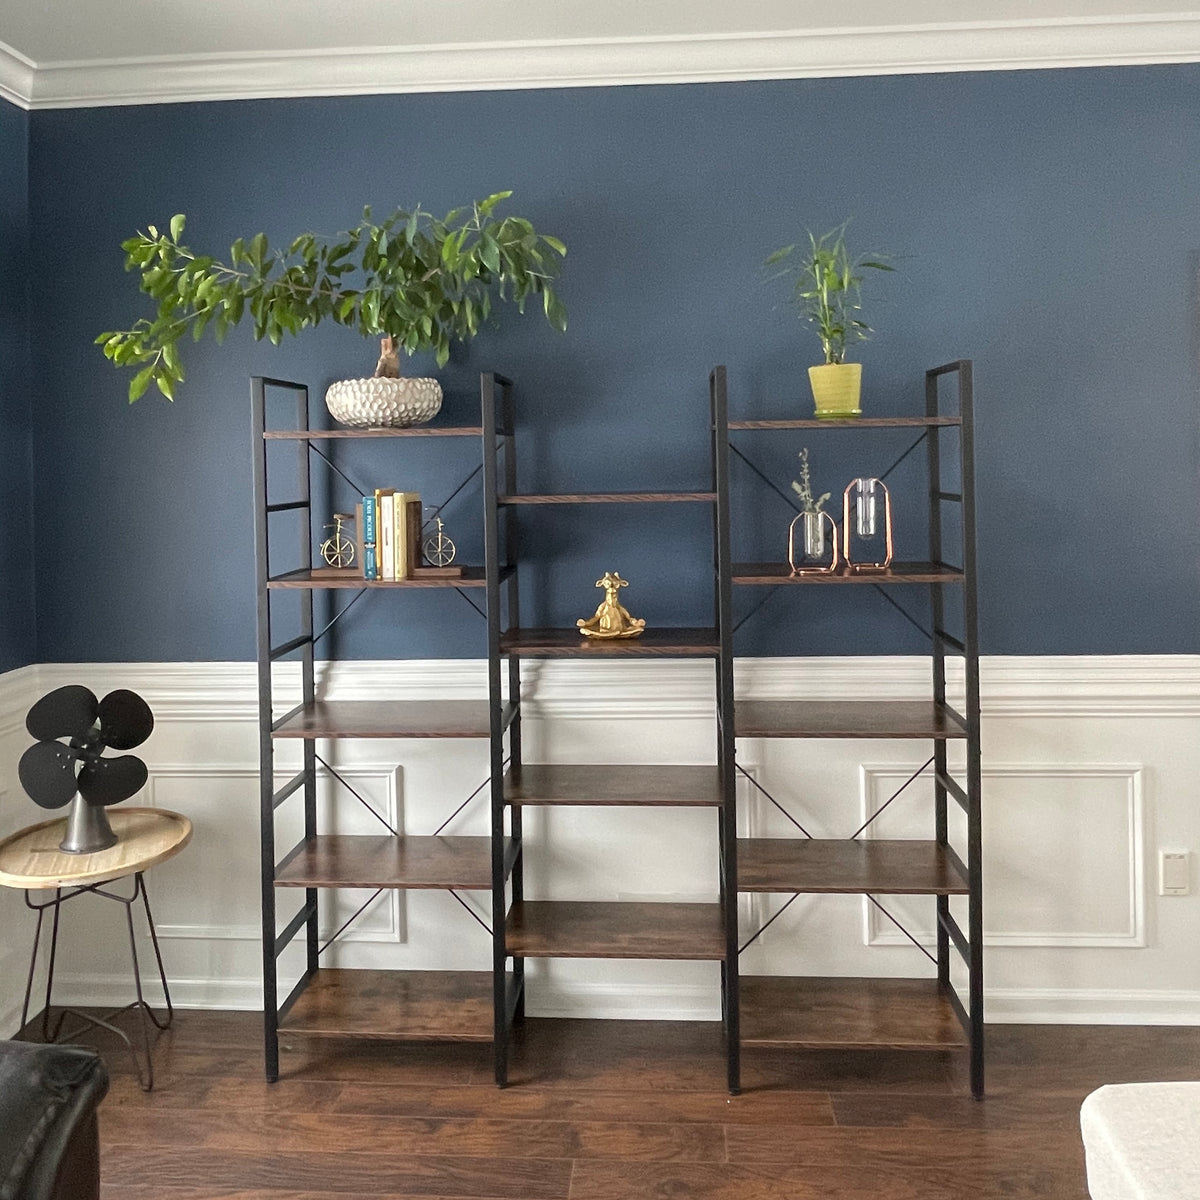 17 Stories Bookcases and Bookshelves Triple Wide 5 Tiers Industrial Bookshelf, Large Etagere Bookshelf Open Display Shelves with Metal Frame for Livin